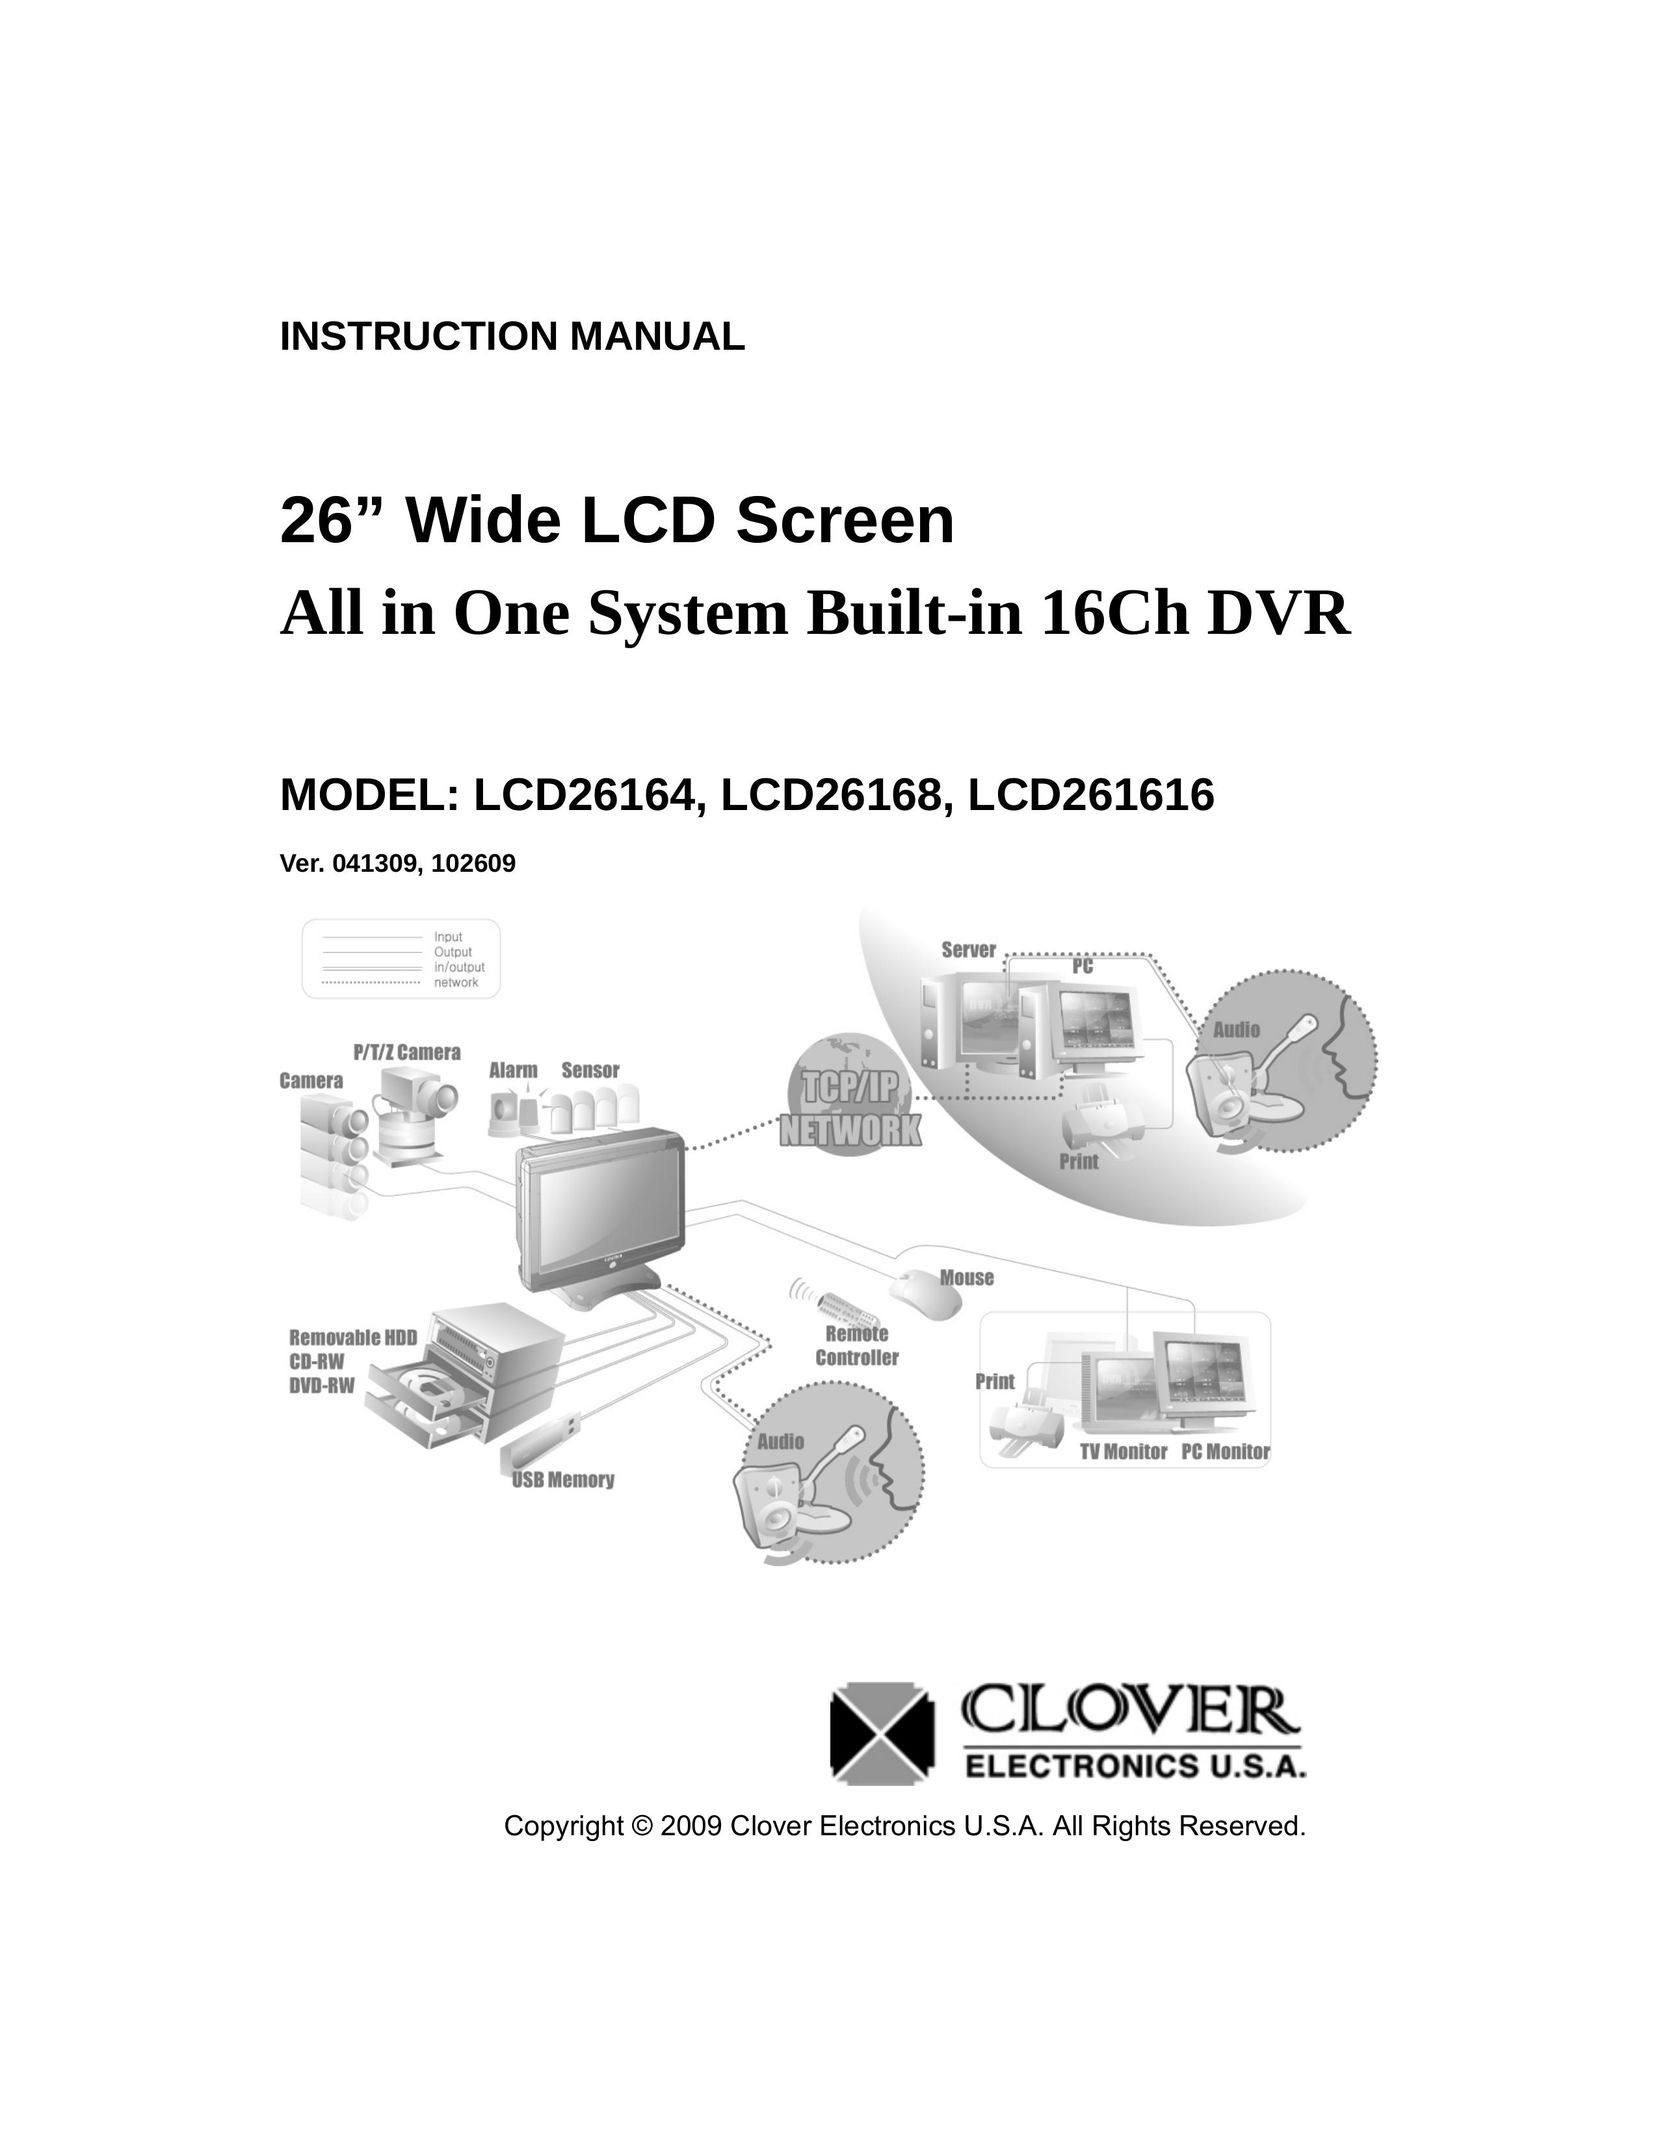 Clover Electronics LCD26164 Computer Monitor User Manual